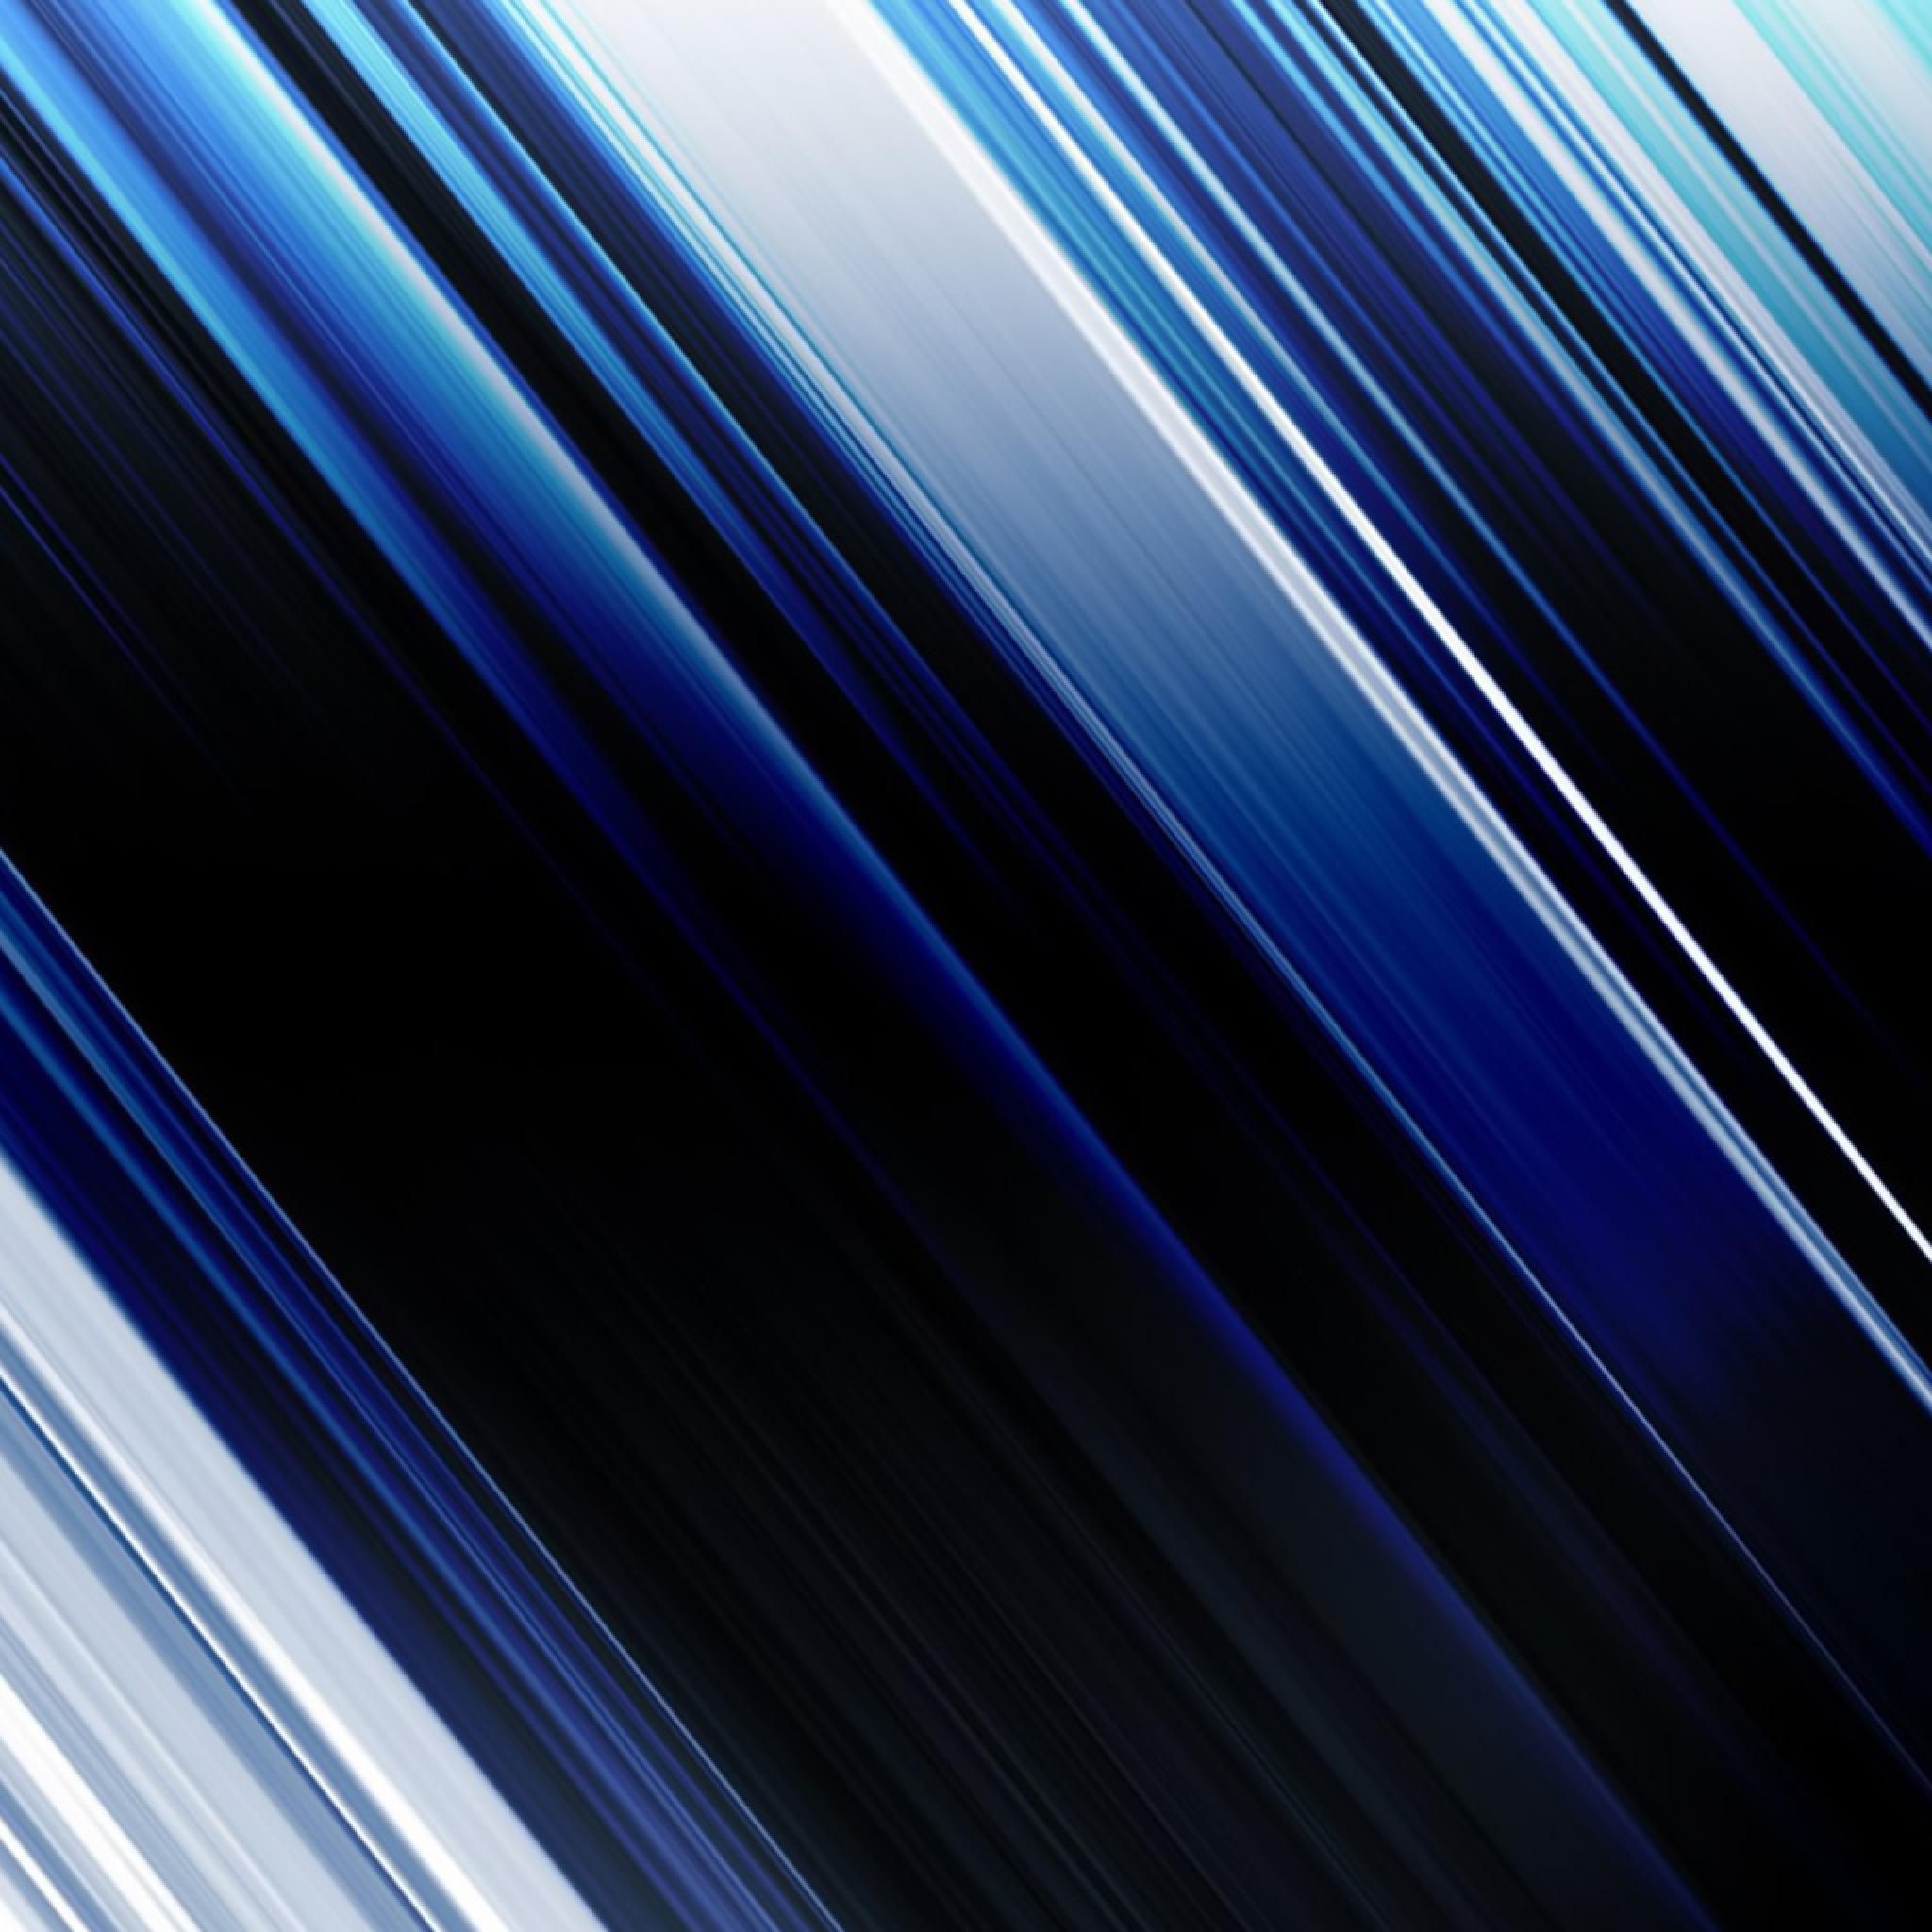 Background And Blue Stripes iPhone HD Wallpaper Free